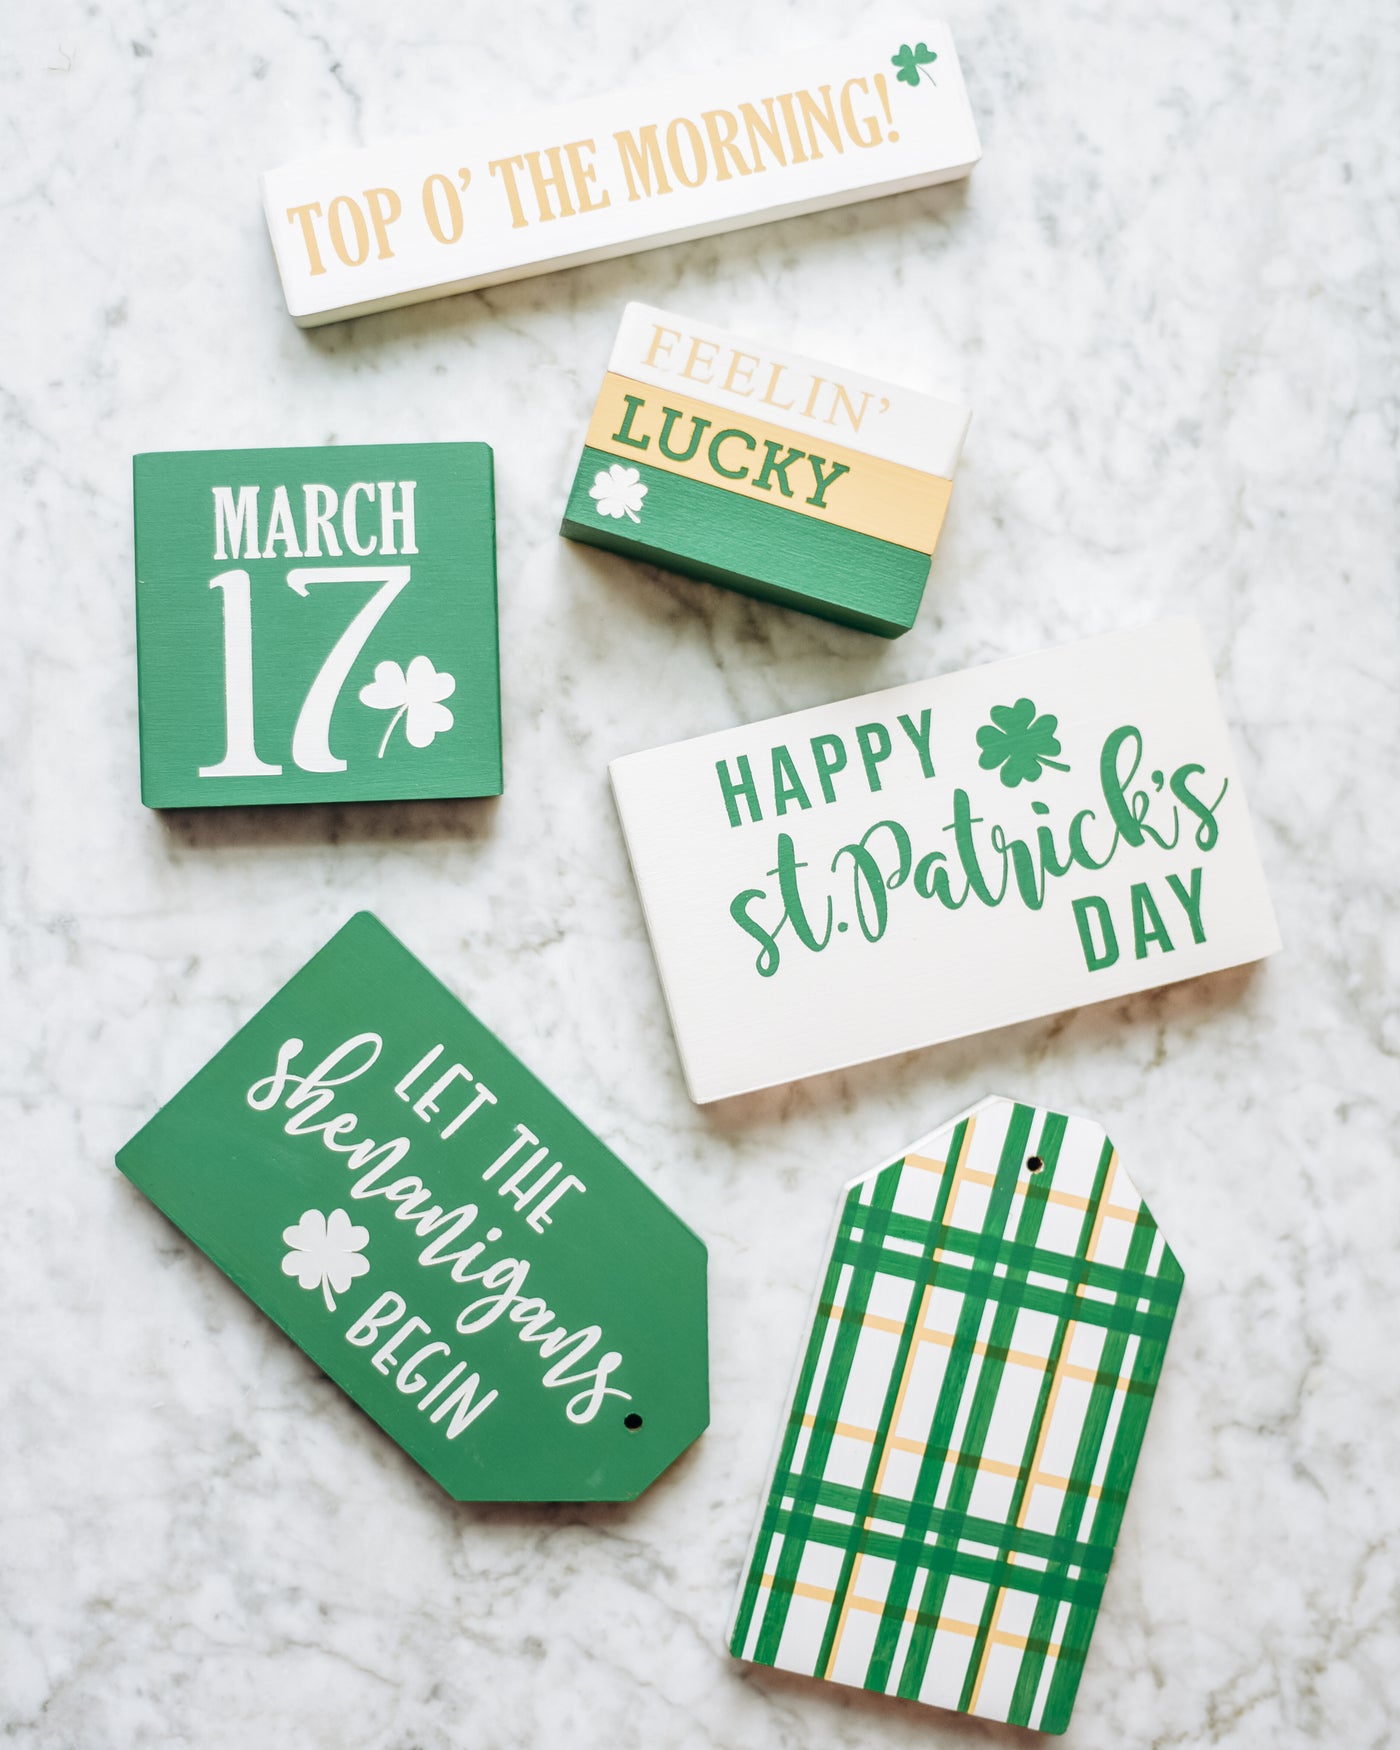 Celebrate St. Patrick's Day With DIY Home Decor!